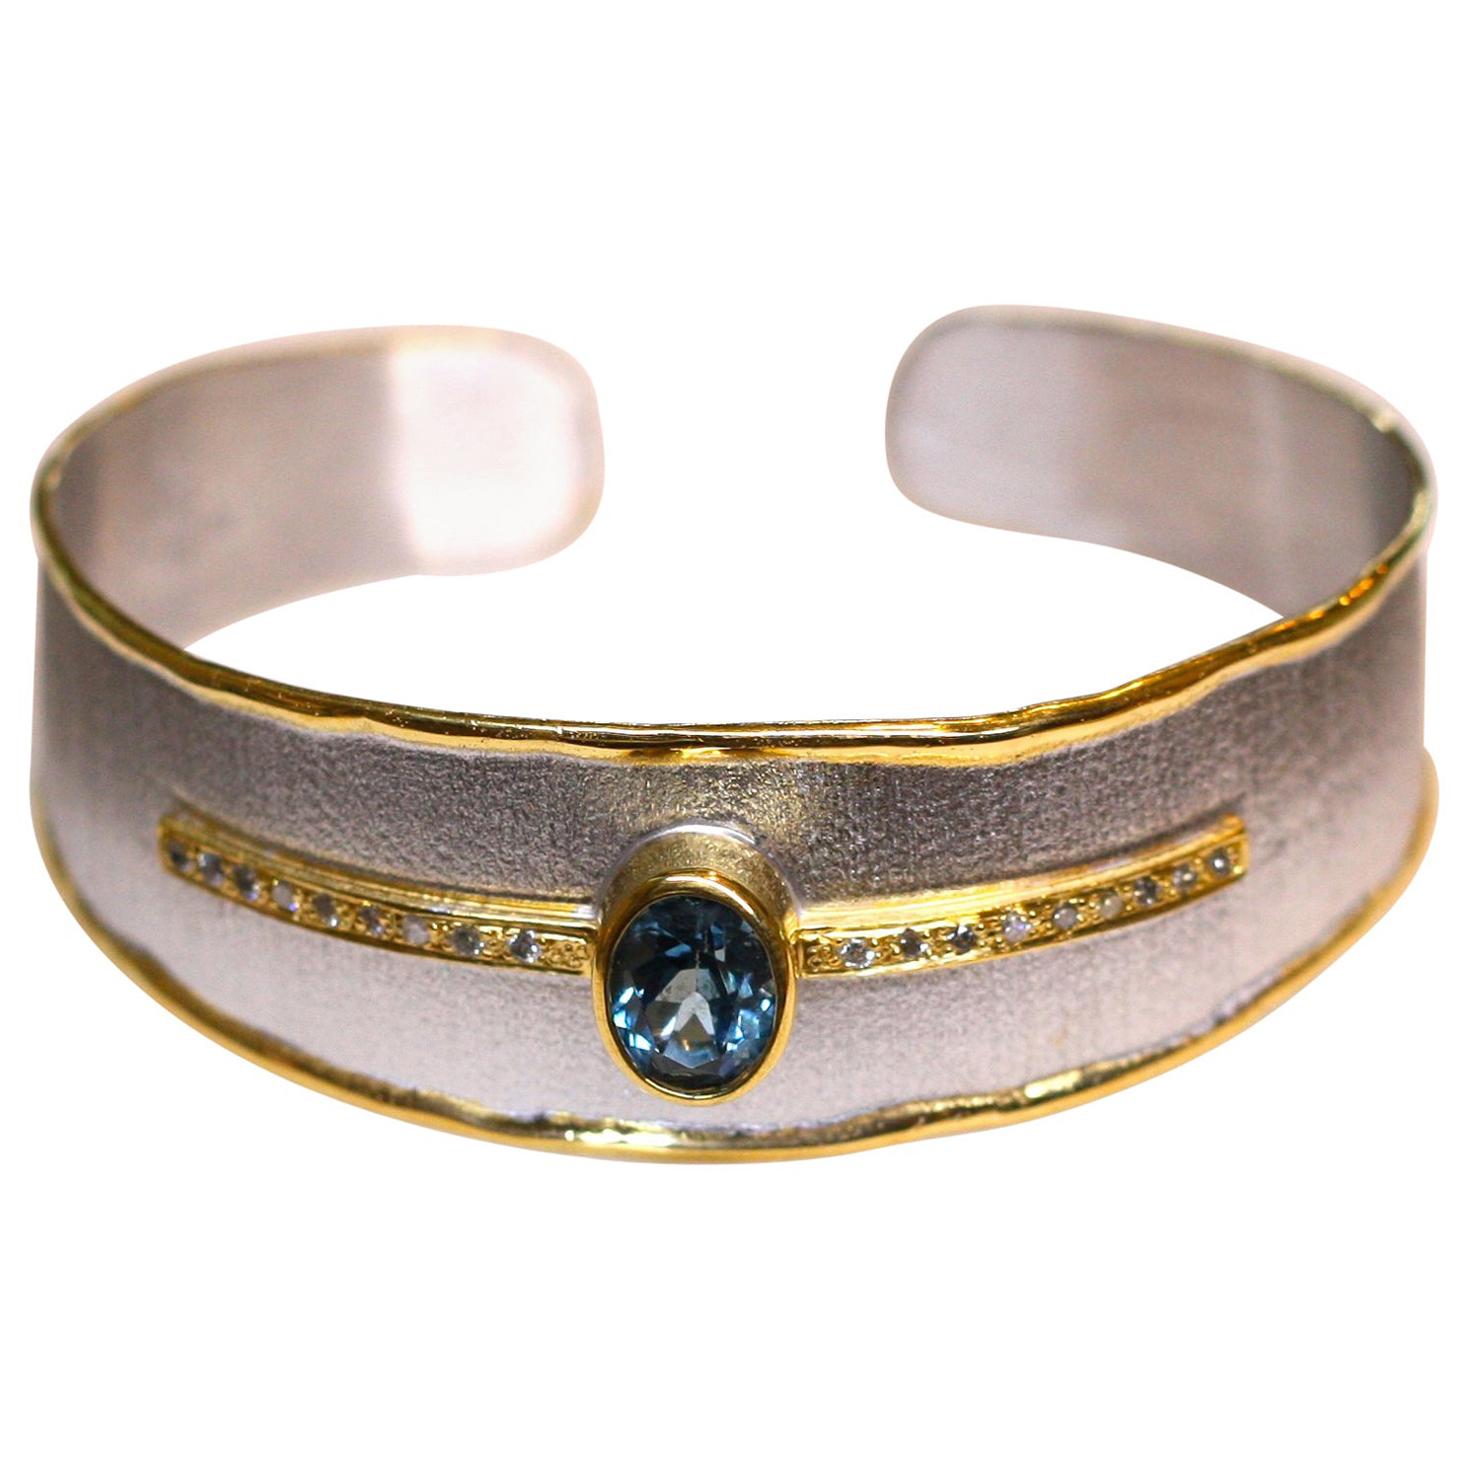 Yianni Creations Blue Topaz Diamonds Silver and Gold Two-Tone Bangle Bracelet